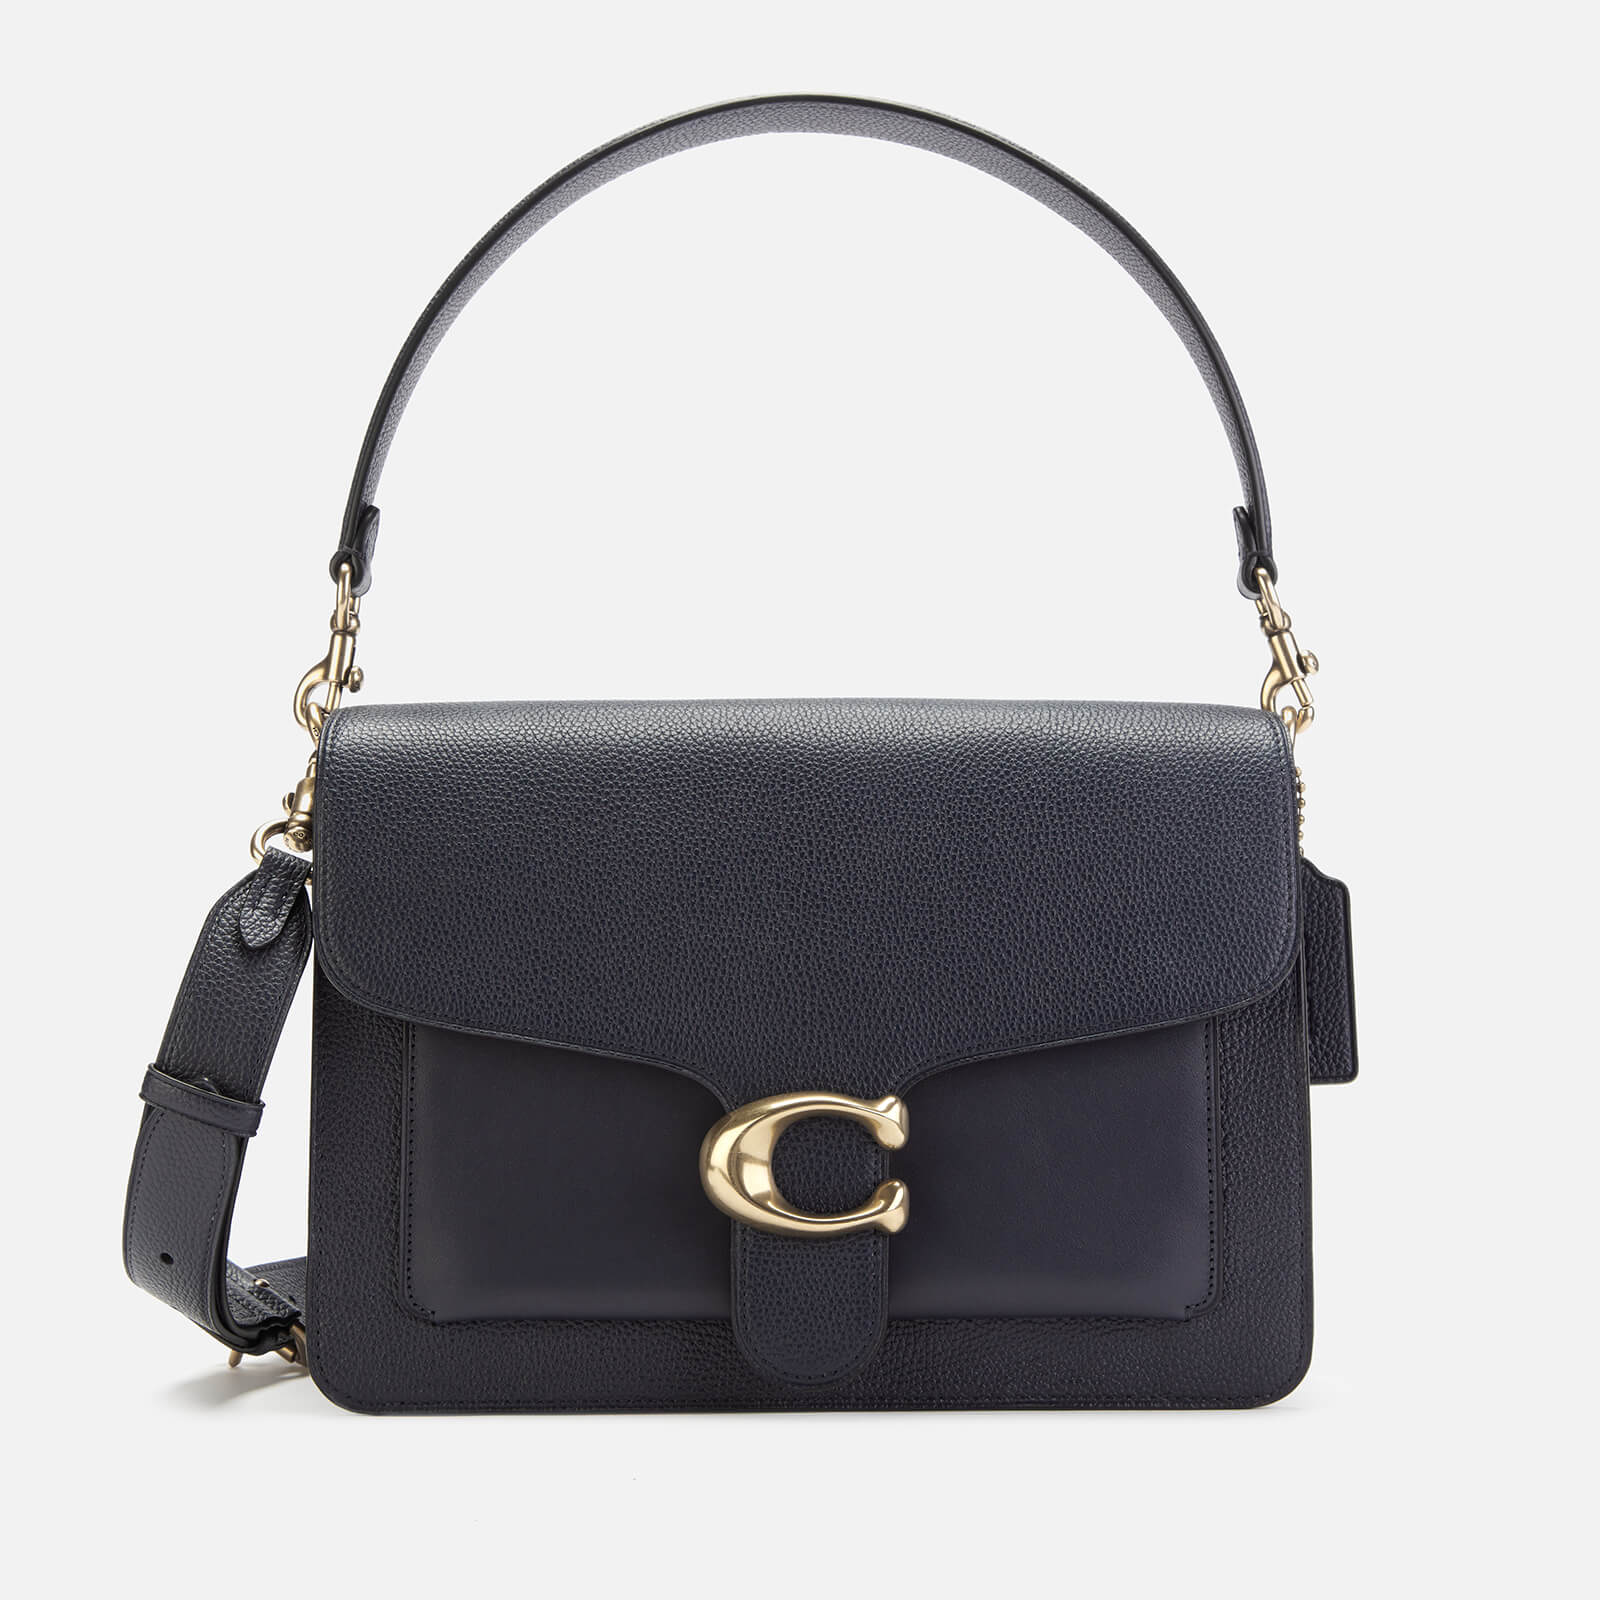 Coach Women's Mixed Leather With Polished Pebble Tabby Shoulder Bag - Midnight Navy